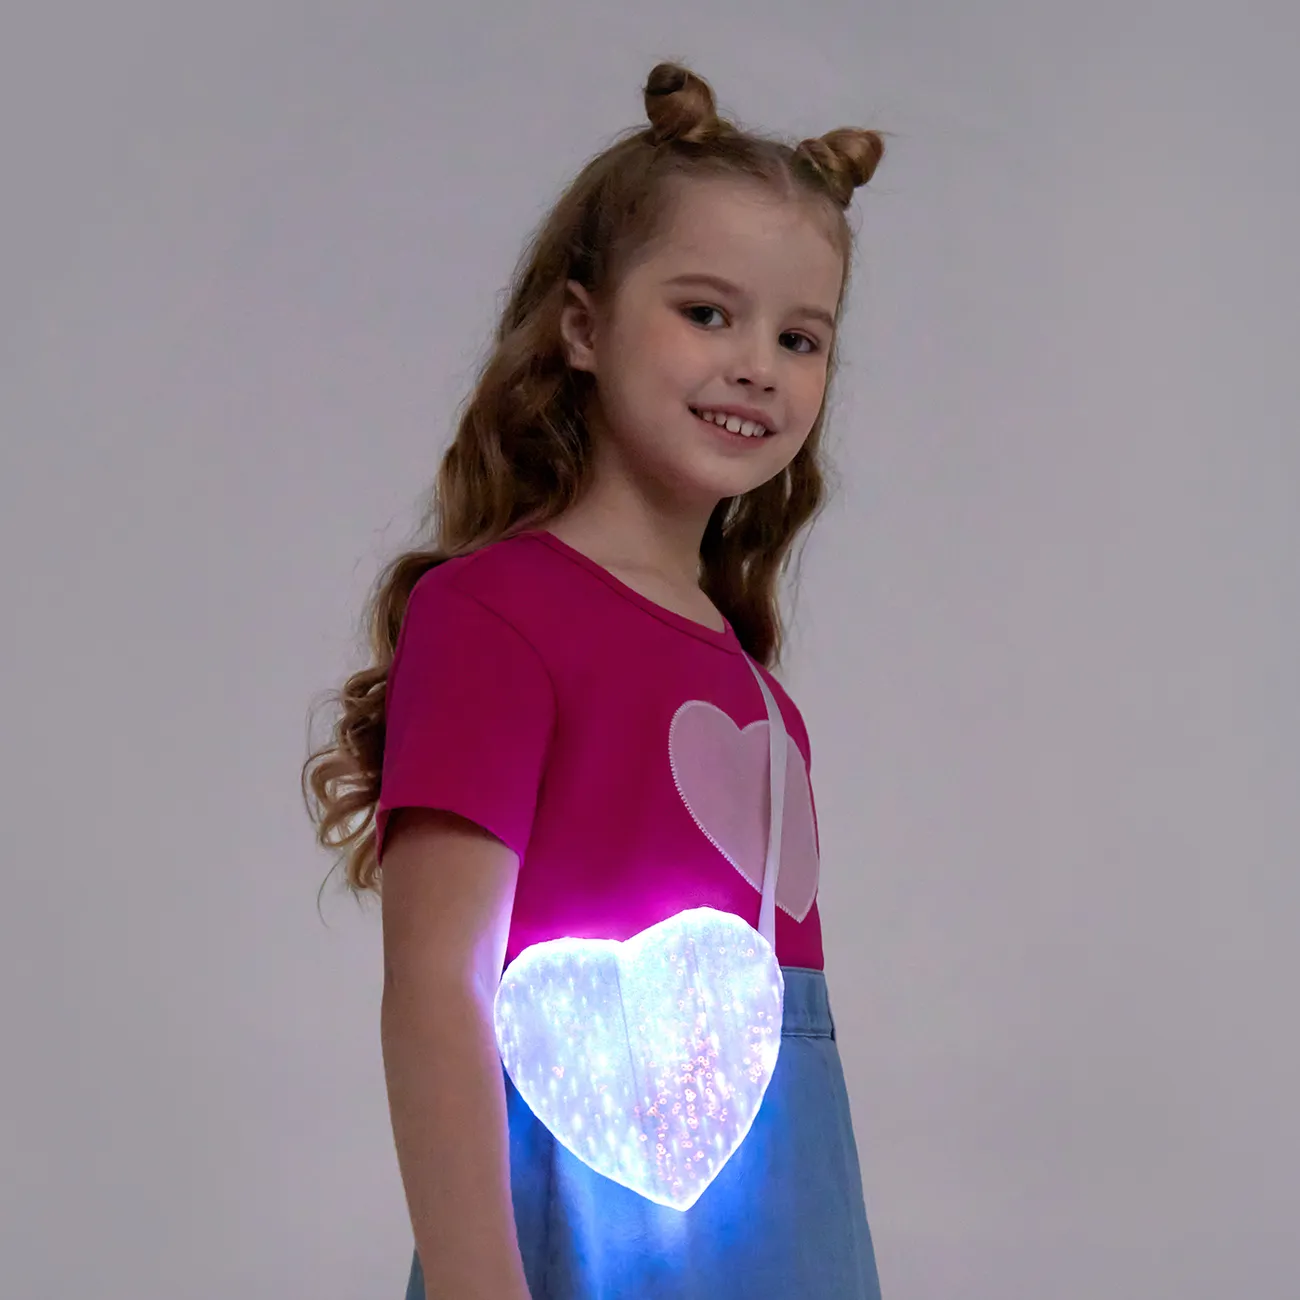 Go-Glow Illuminating T-shirt with Removable Light Up Heart-Shaped Bag Including Controller (Built-In Battery) Hot Pink big image 1